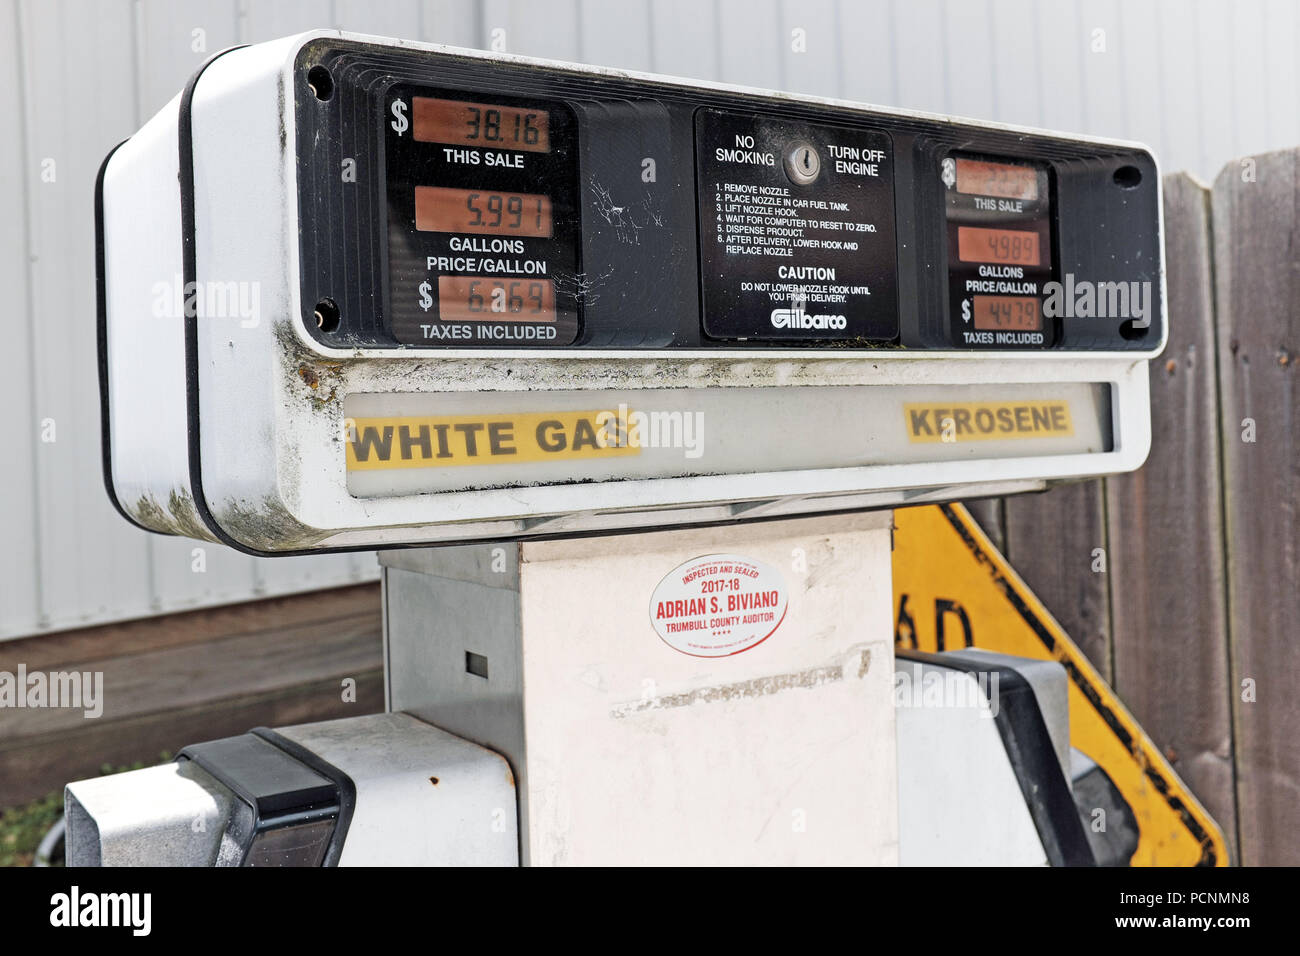 Outdoor White Gas and Kerosene commercial dual fuel pump in Ohio Amish Country with price per gallon and taxes paid shown. Stock Photo